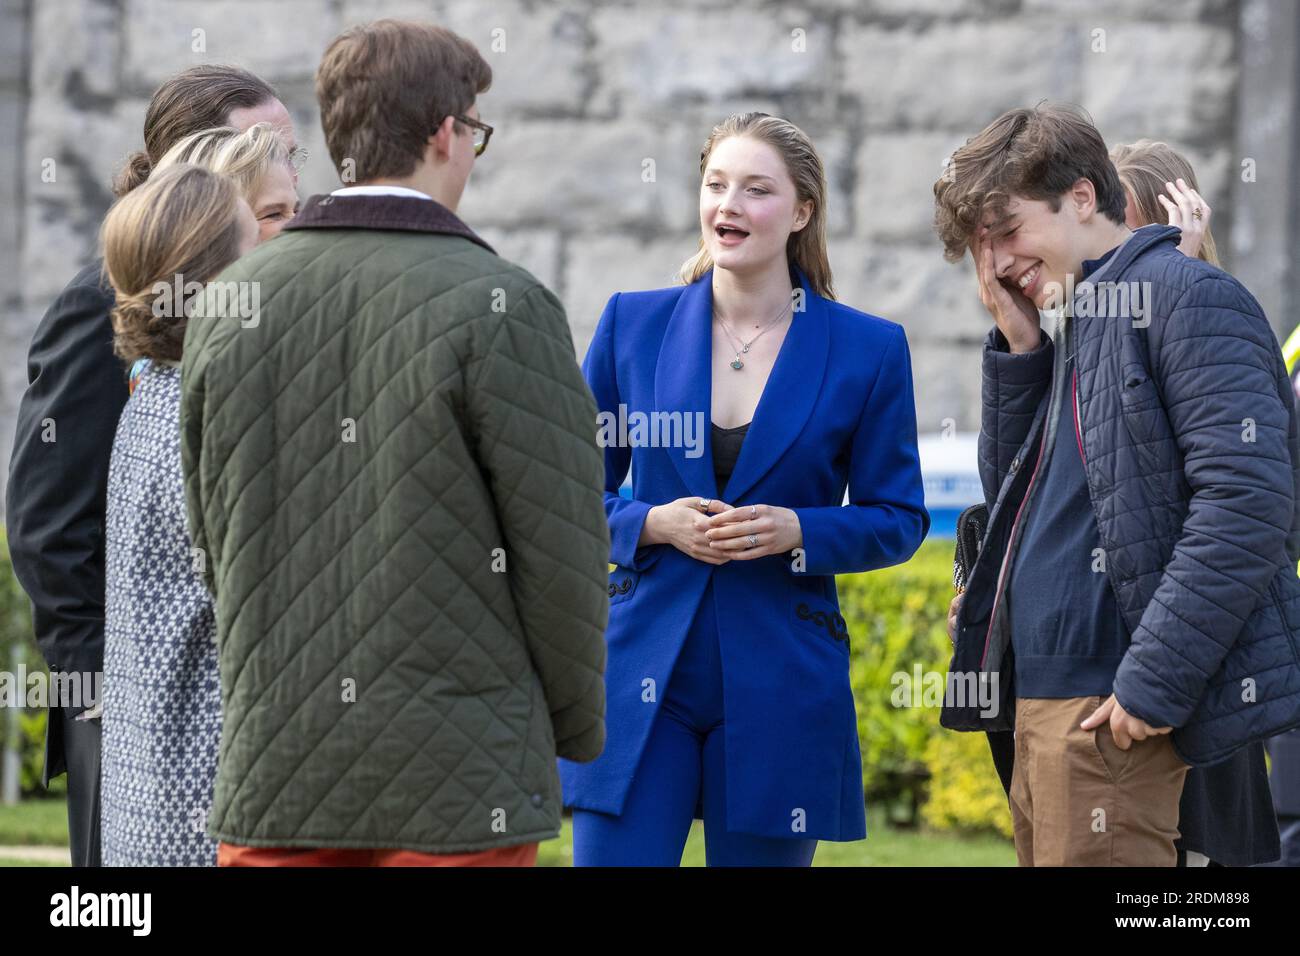 Brussels, Belgium. 21st July, 2023. Prince Nicolas, Josephine O'Hare,  Prince Aymeric and Princess Louise pictured during a royal visit to the  concert and fireworks 'Belgium Celebrates - Belgie viert feest - La